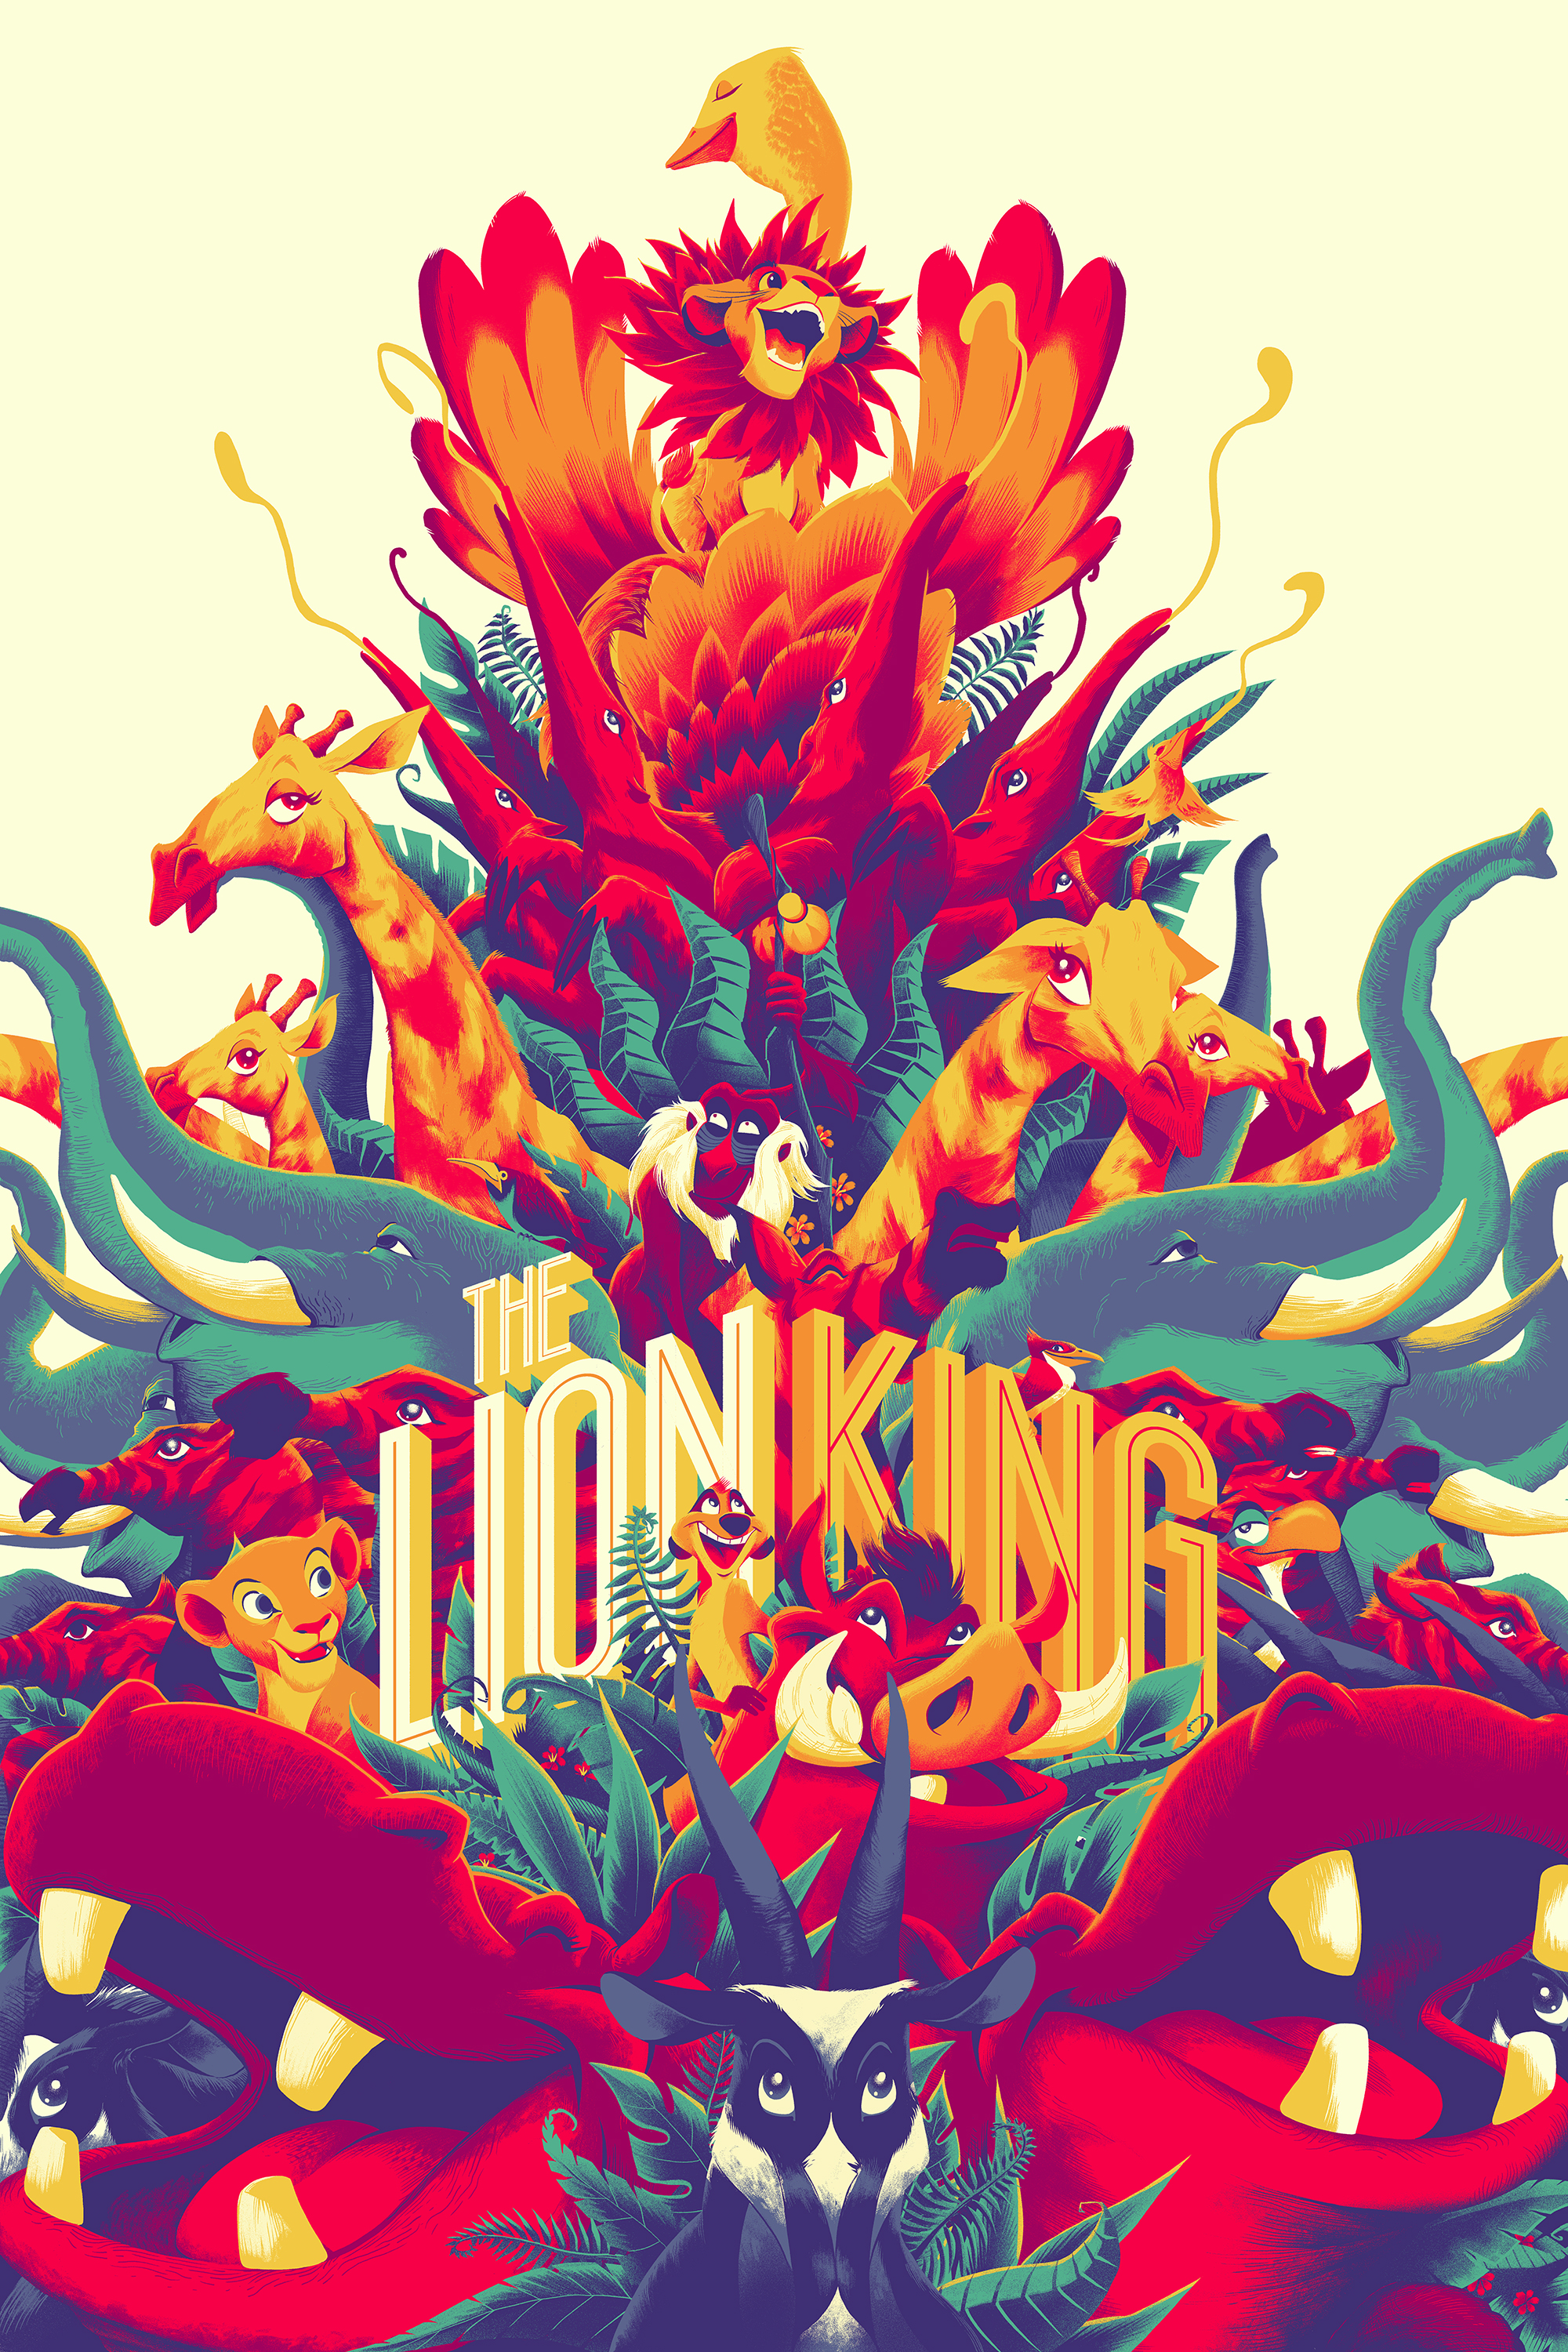 'The Lion King' by Matt Taylor for Mondo